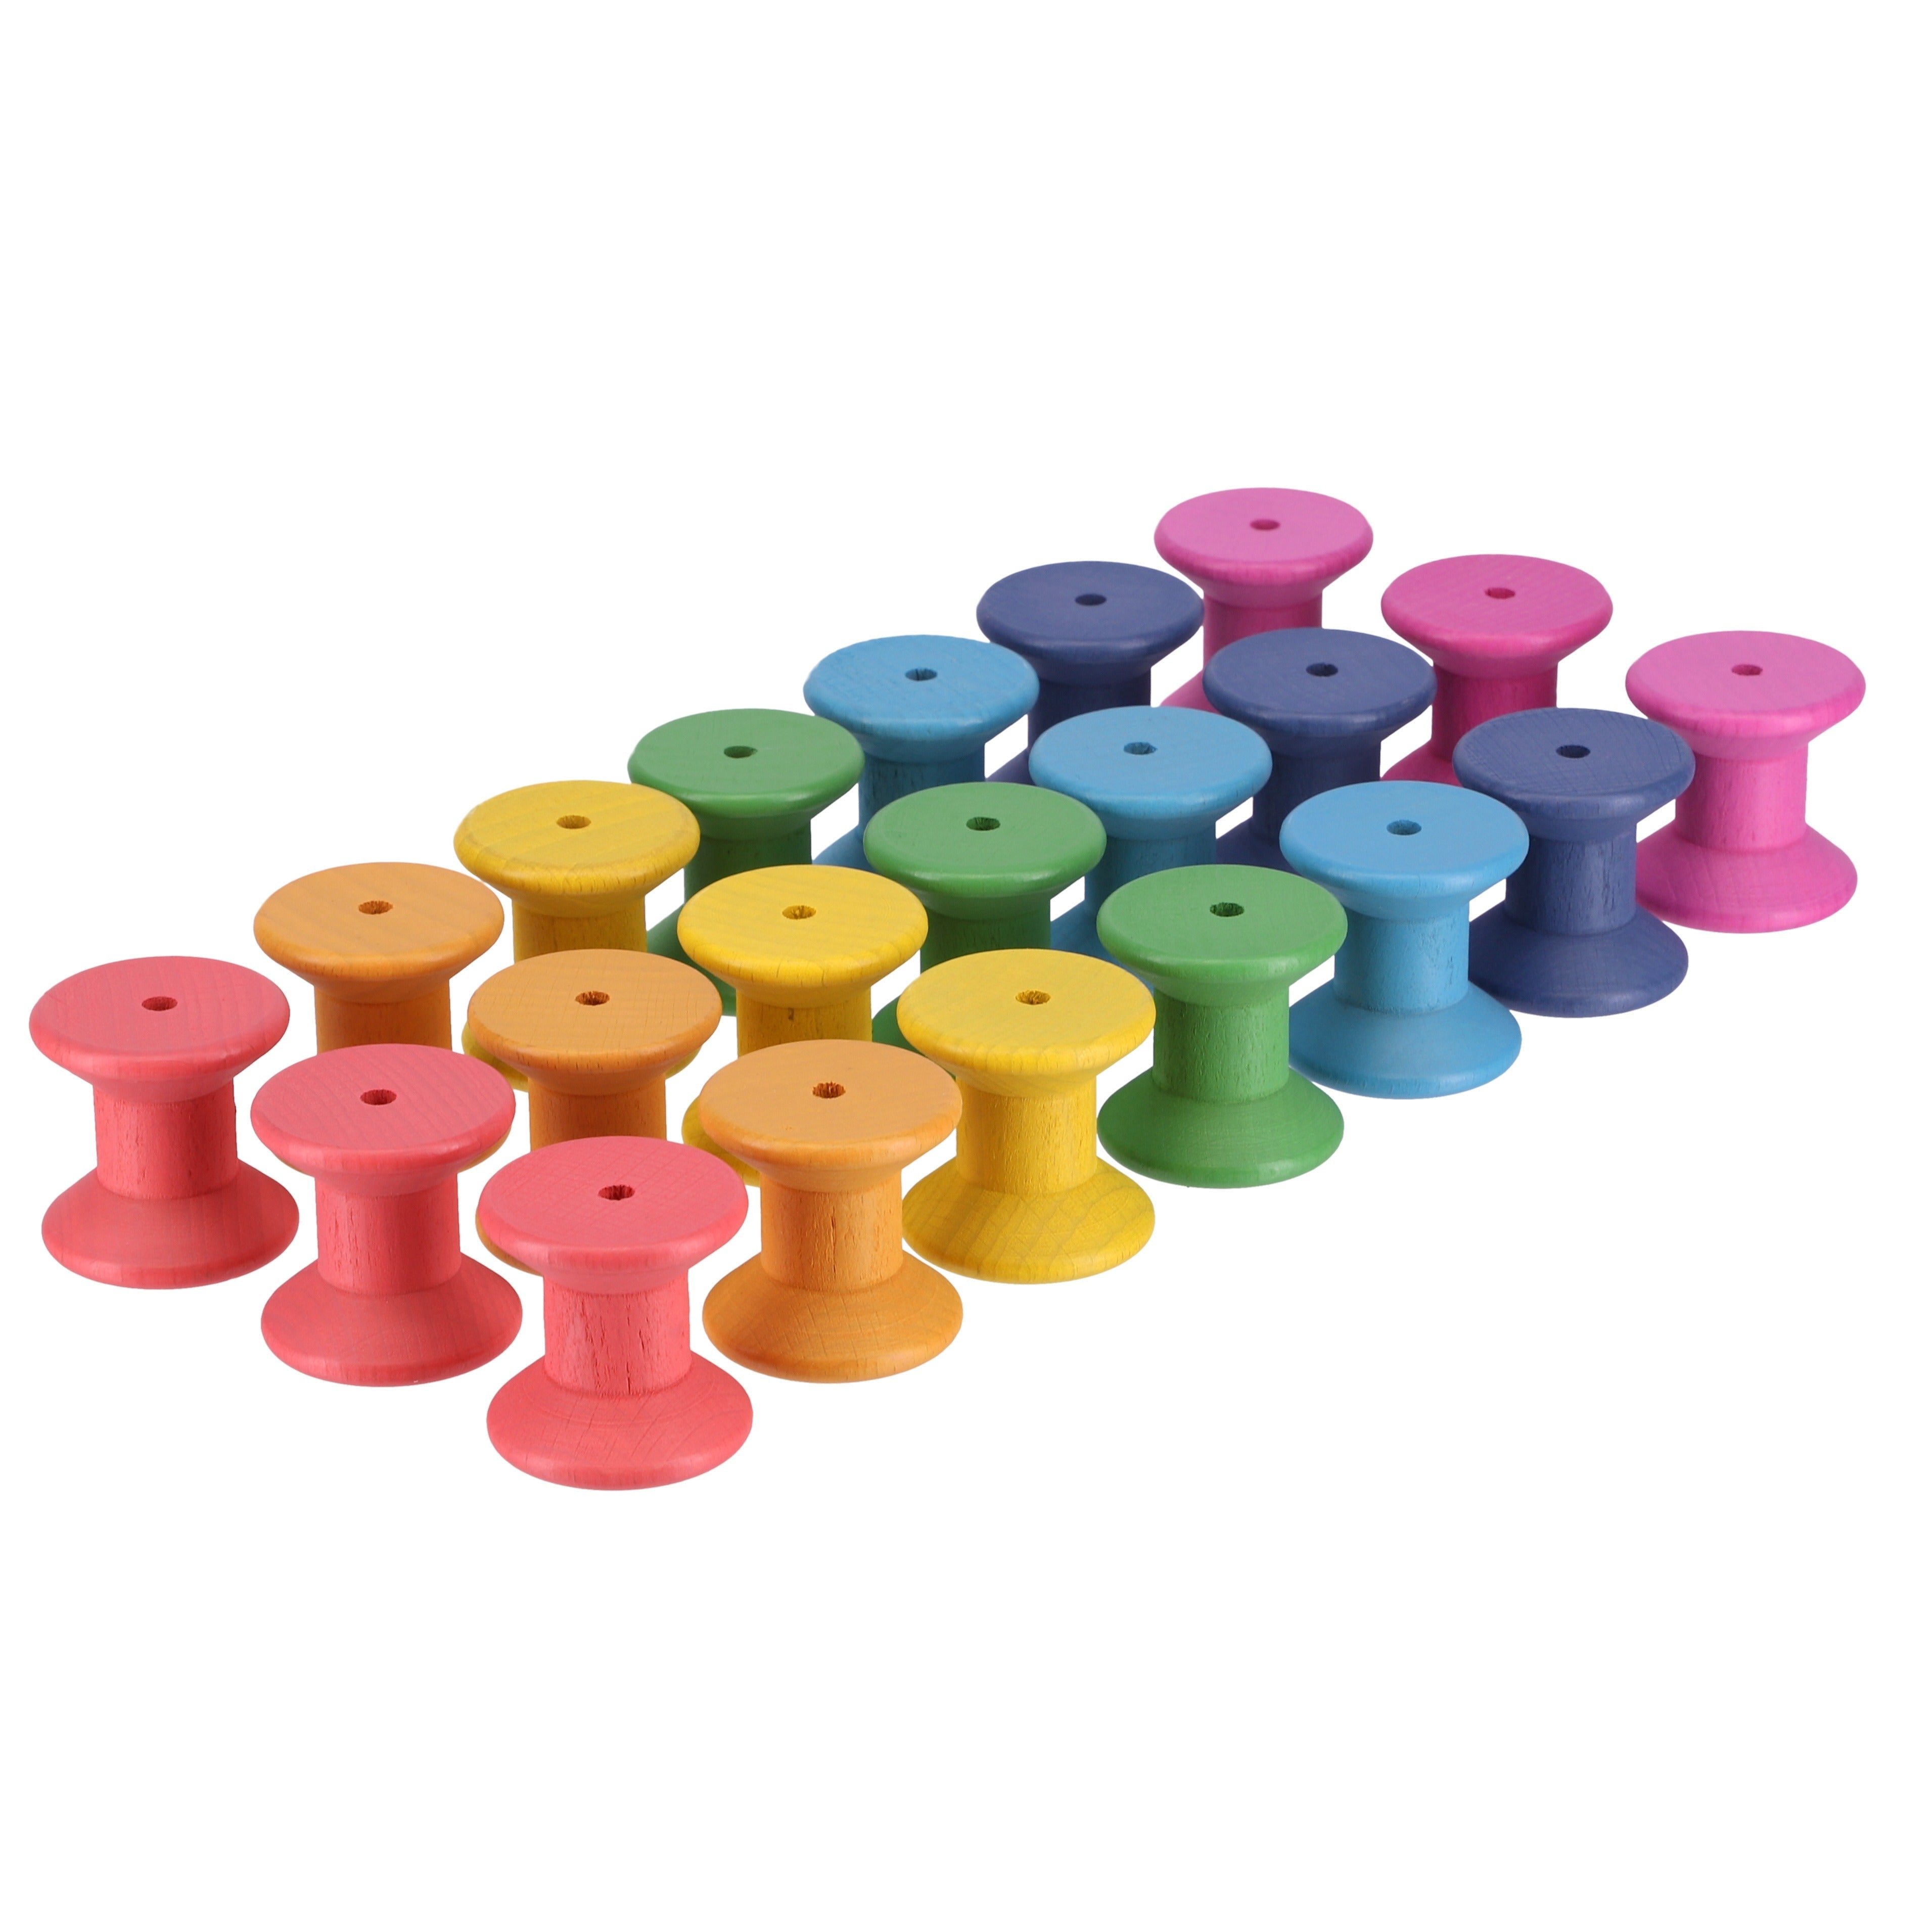 TickiT Rainbow Wooden Spools, Our TickiT® Rainbow Wooden Spools are made from beautiful smooth solid beechwood with a natural woodgrain finish in the seven different colours of the rainbow. Ideal for stacking, rolling, threading and accessorising small world play scenes. The TickiT Rainbow Wooden Spools are perfect for your child to use their imagination during creative play, build on construction skills, improve counting, sorting, stacking and sequencing skills and learn about colour and pattern-making. Th